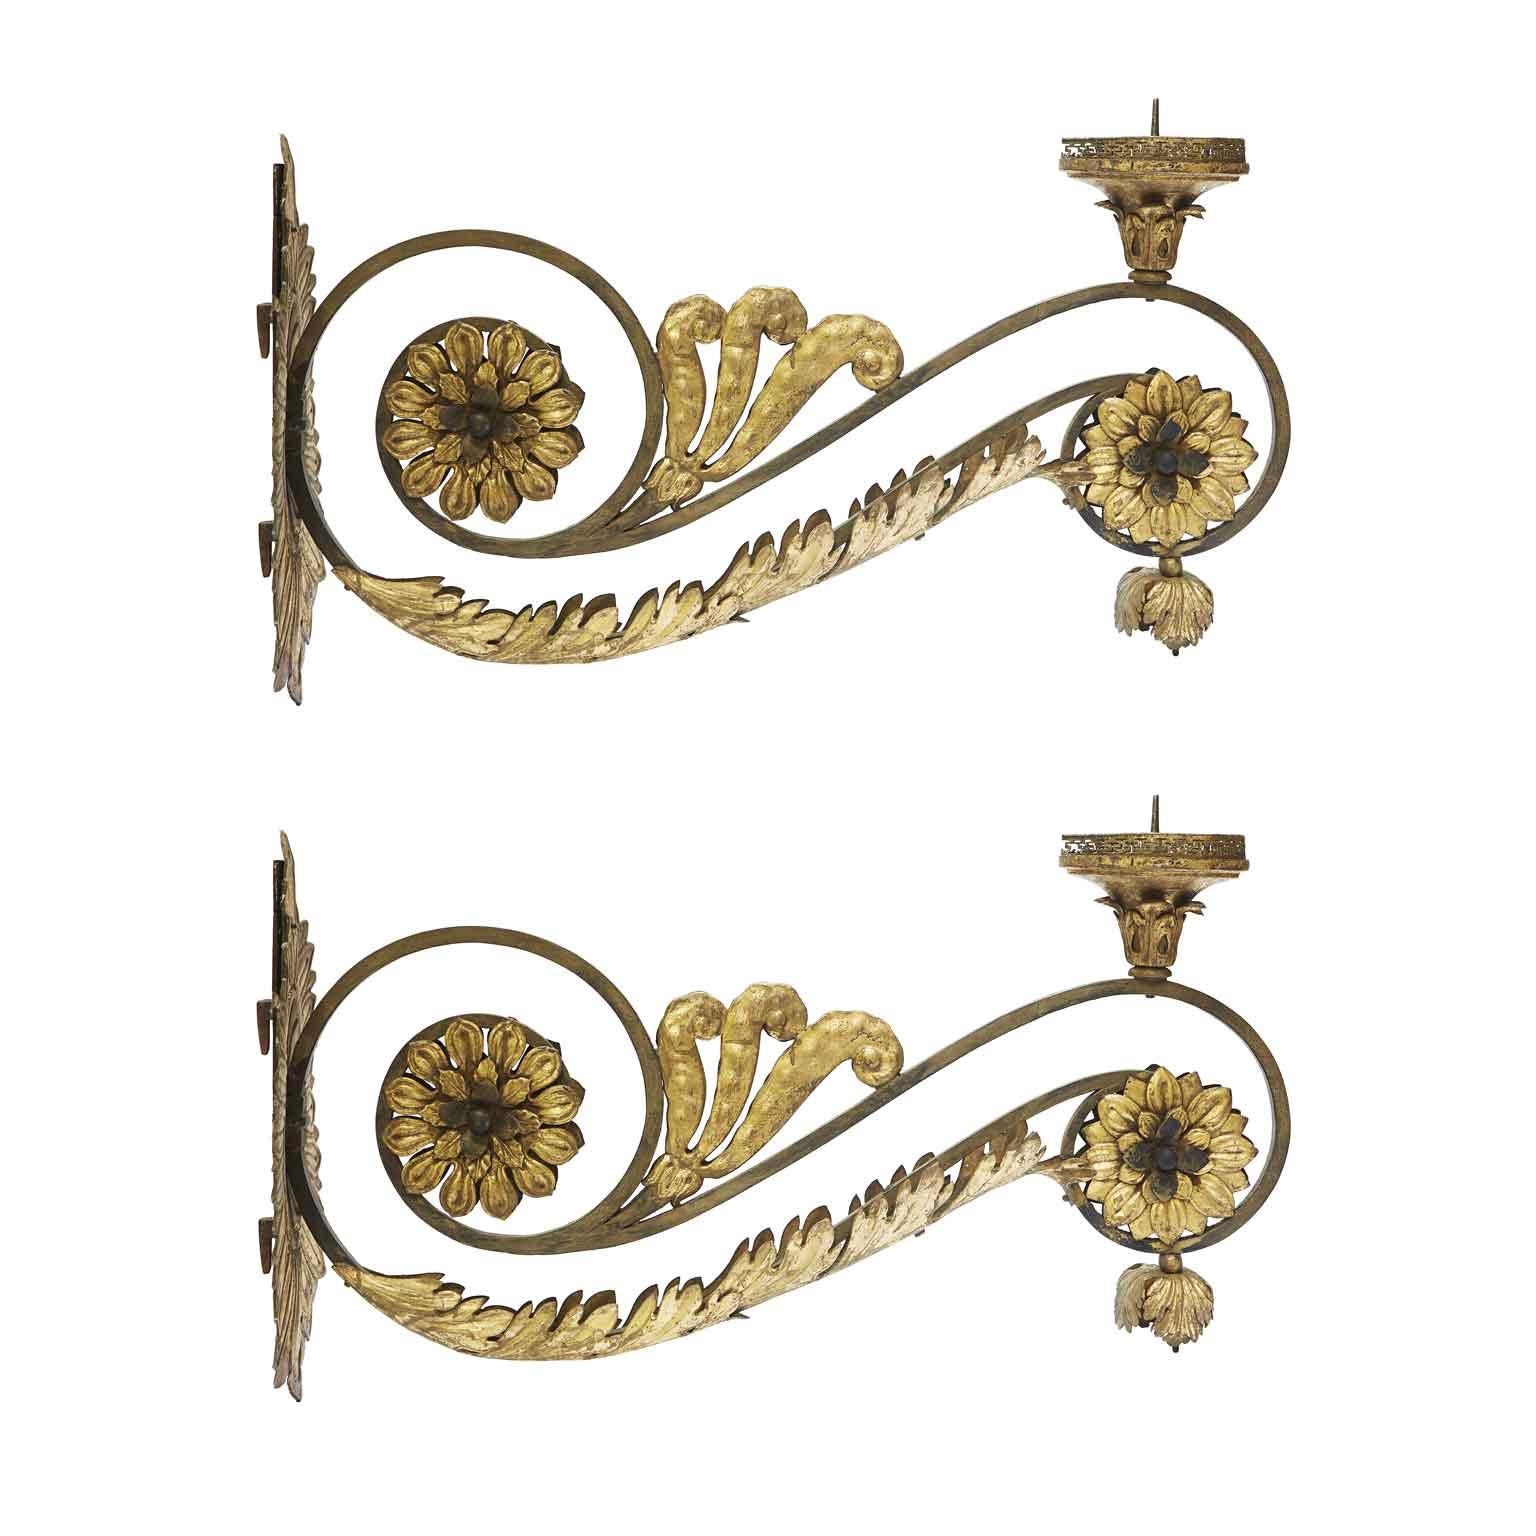 Pair of Large Italian Gilded Sconces With Sunflowers and Scrolls from 1700 Arms For Votive Lamps made with an important wrought-iron scrolling structure with a square cross-section and decorated with embossed and gilded copper vegetal and floral